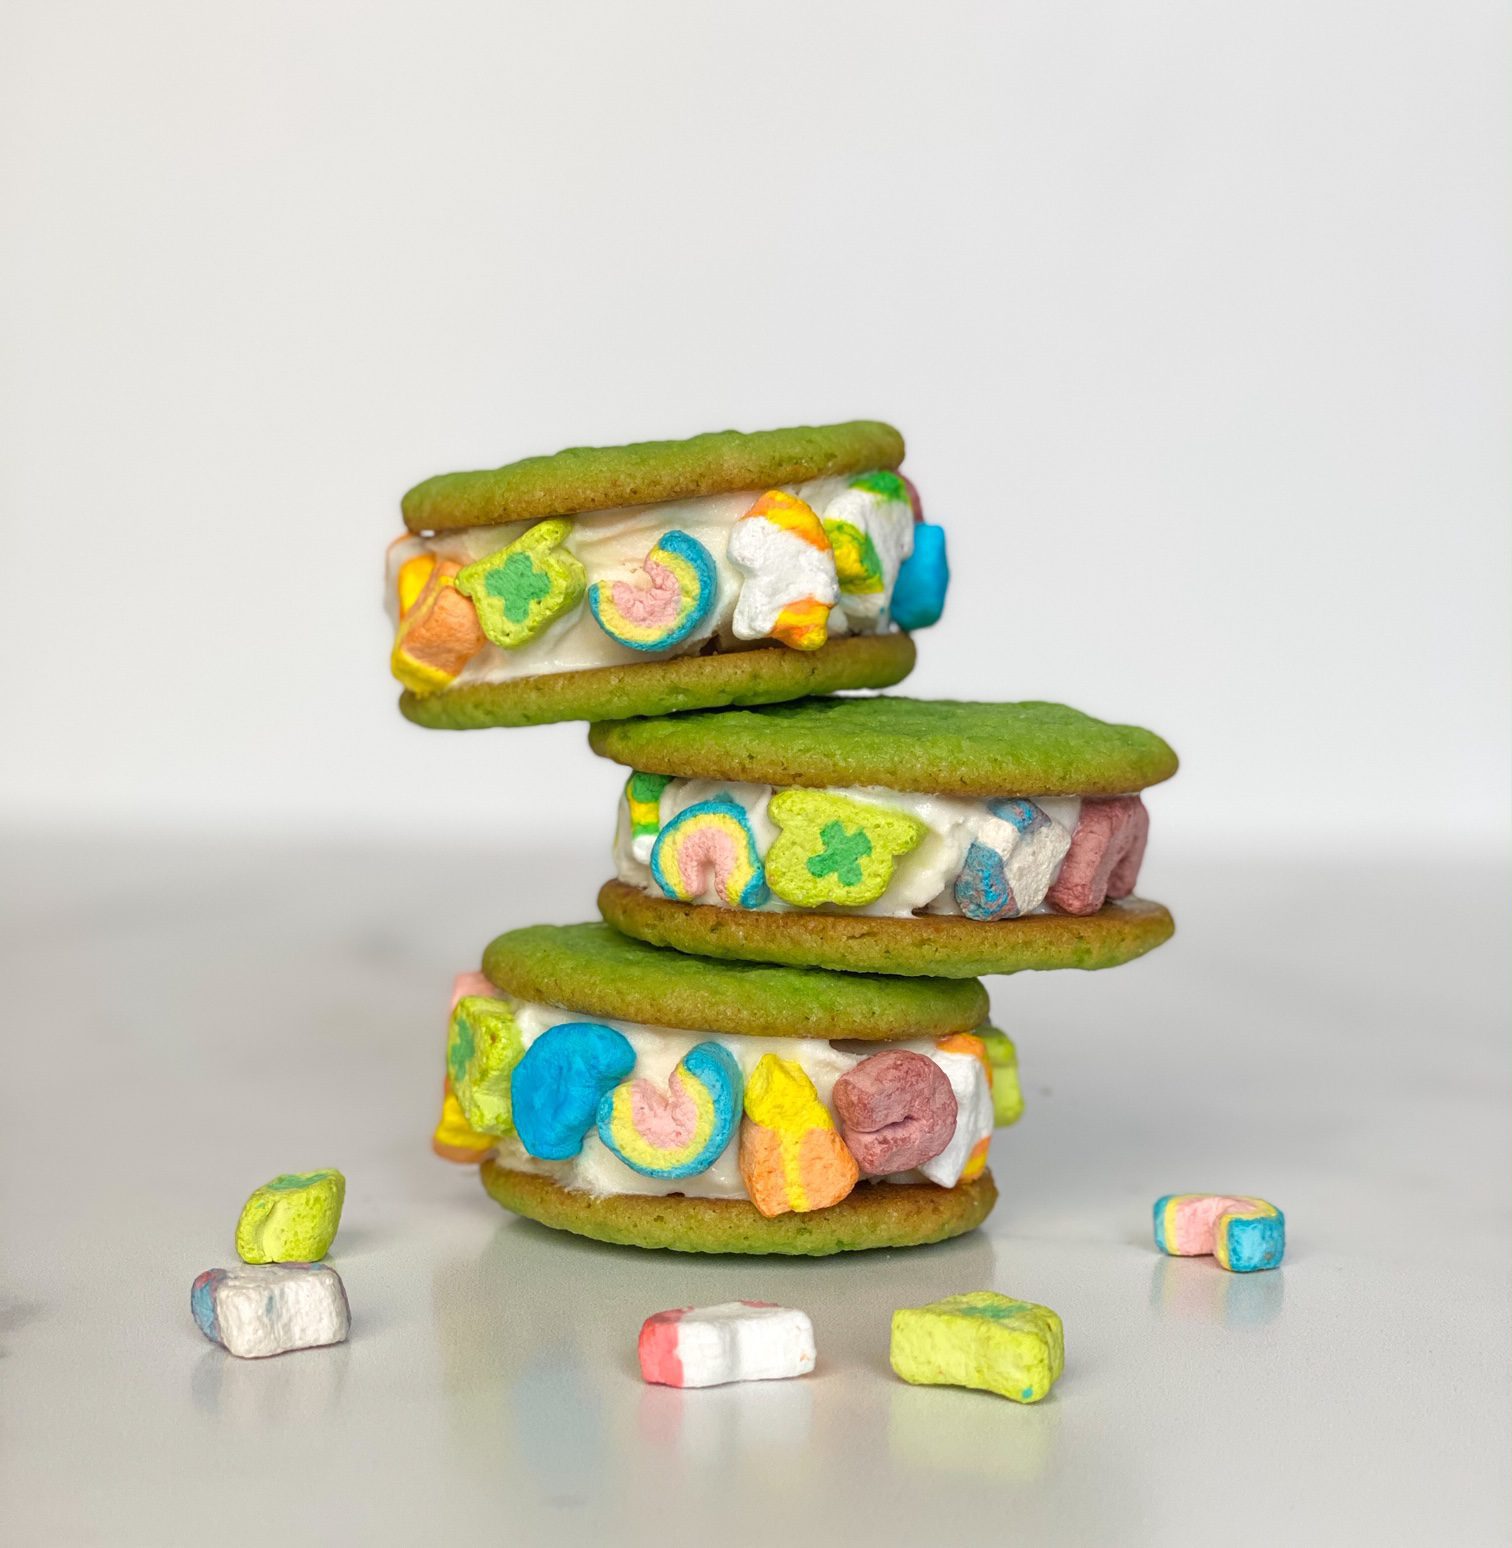 Lucky Charms ice cream sandwiches